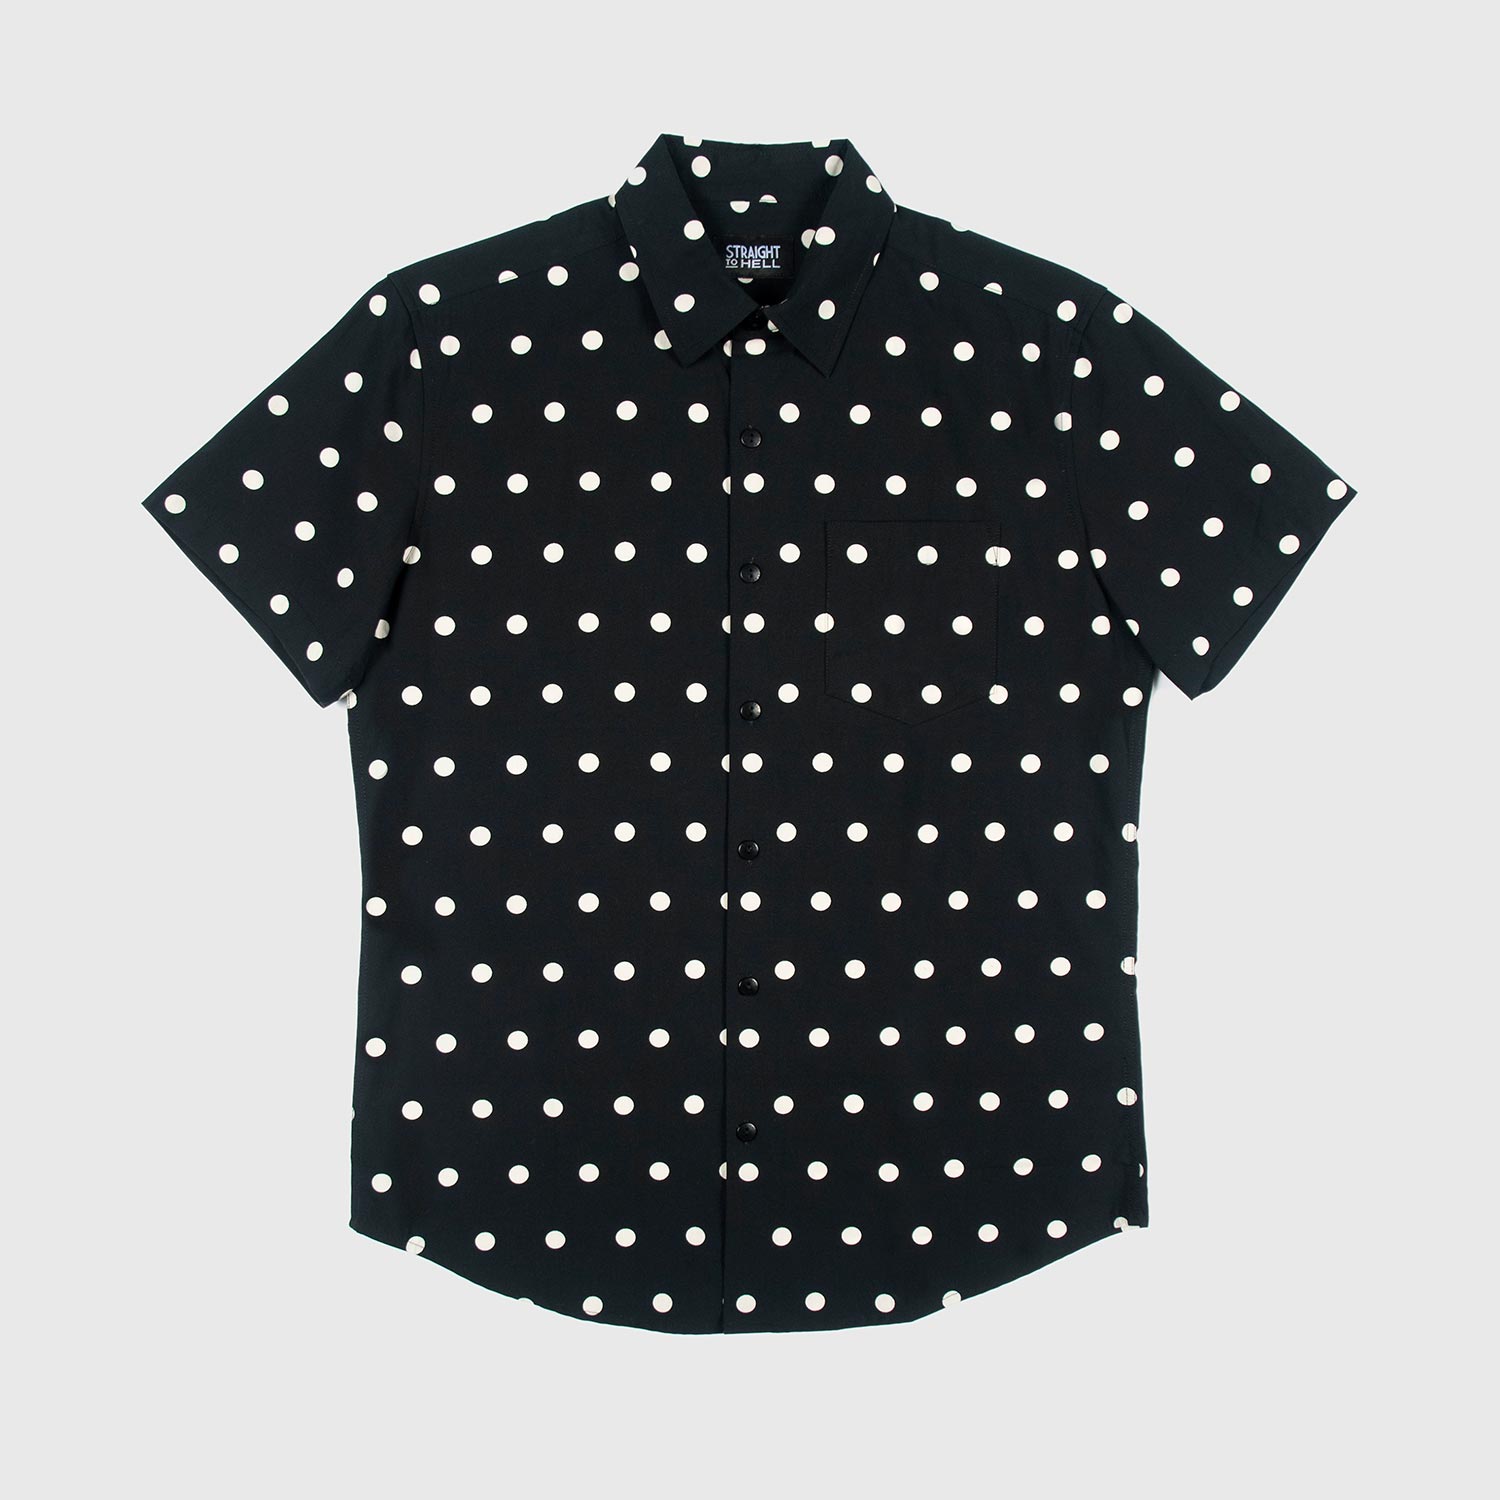 Stepping Stone - Black and White Polka Dot Shirt - Men's by Straight to Hell